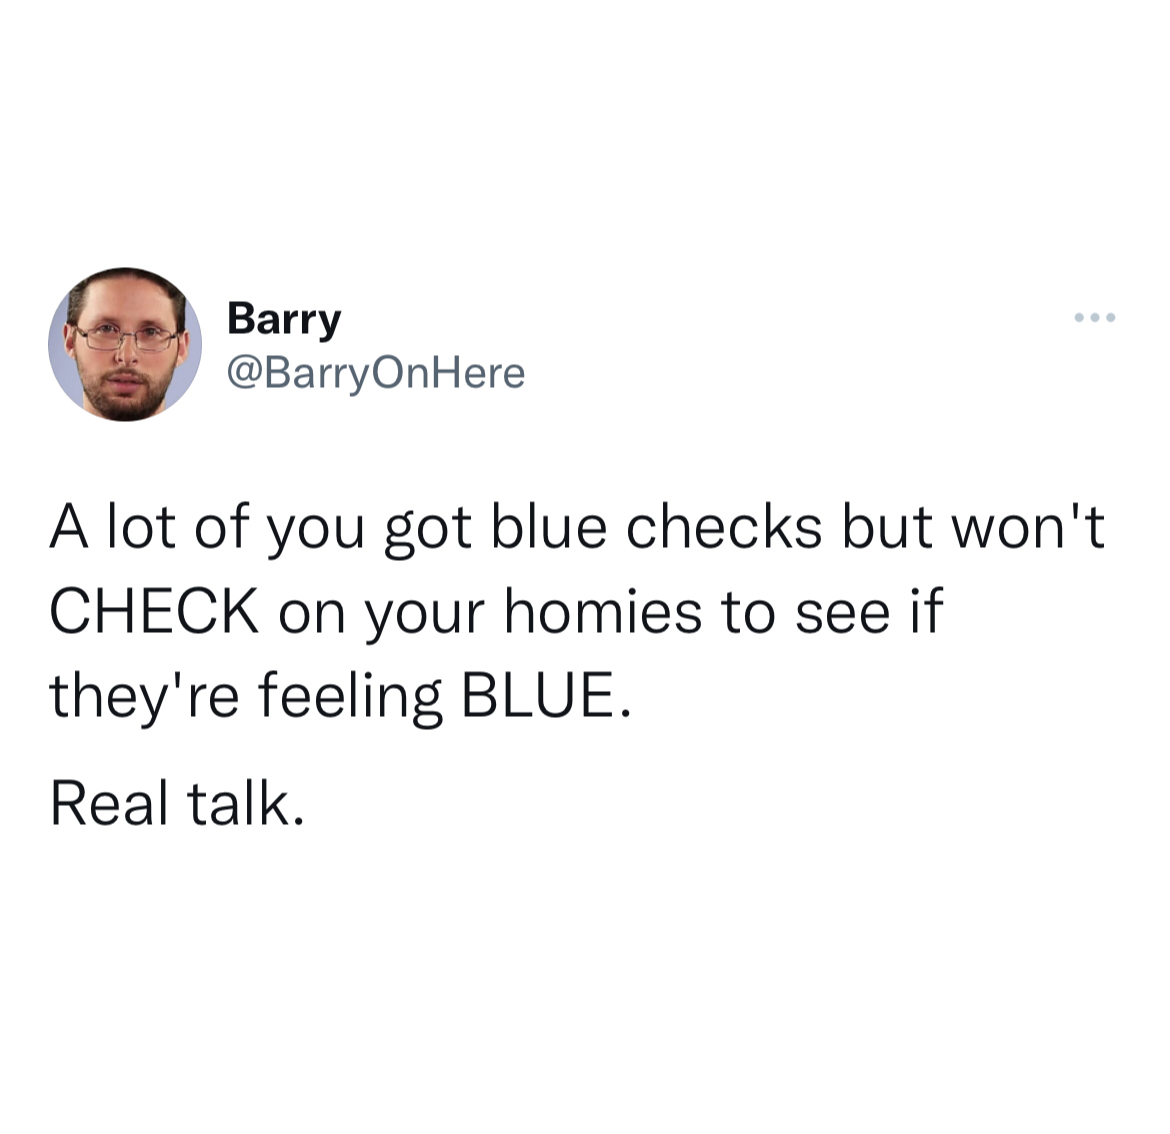 Tweets roasting celebs - wise shower thoughts - Barry A lot of you got blue checks but won't Check on your homies to see if they're feeling Blue. Real talk.